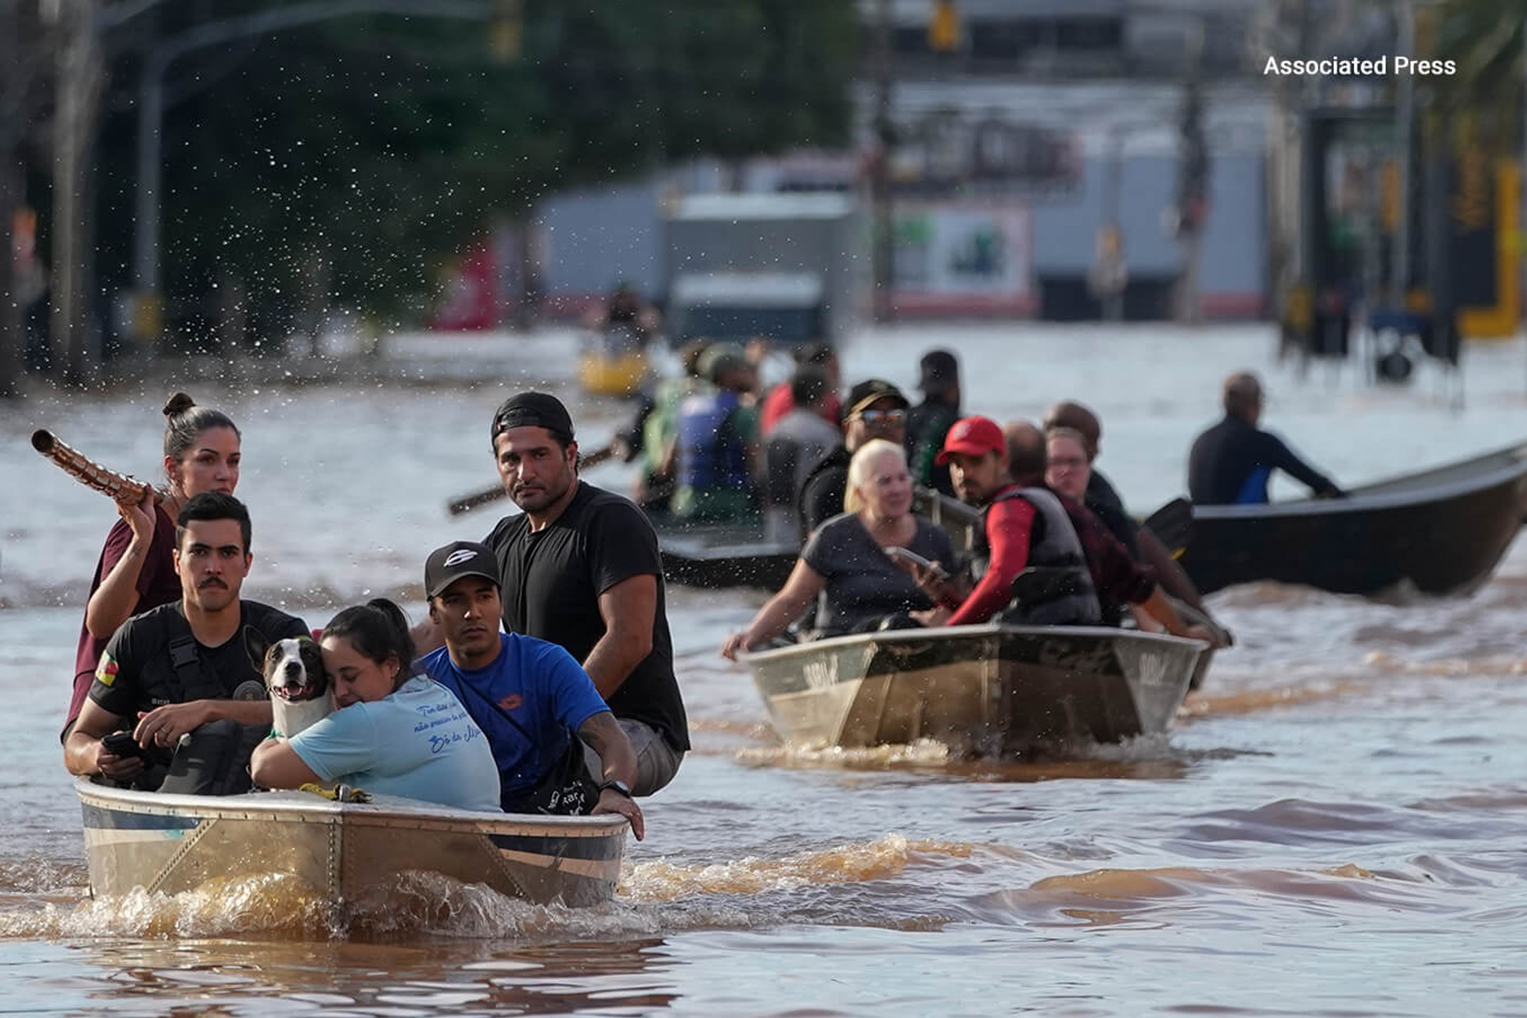 Residents escape by boat from flooded communities in southern Brazil.